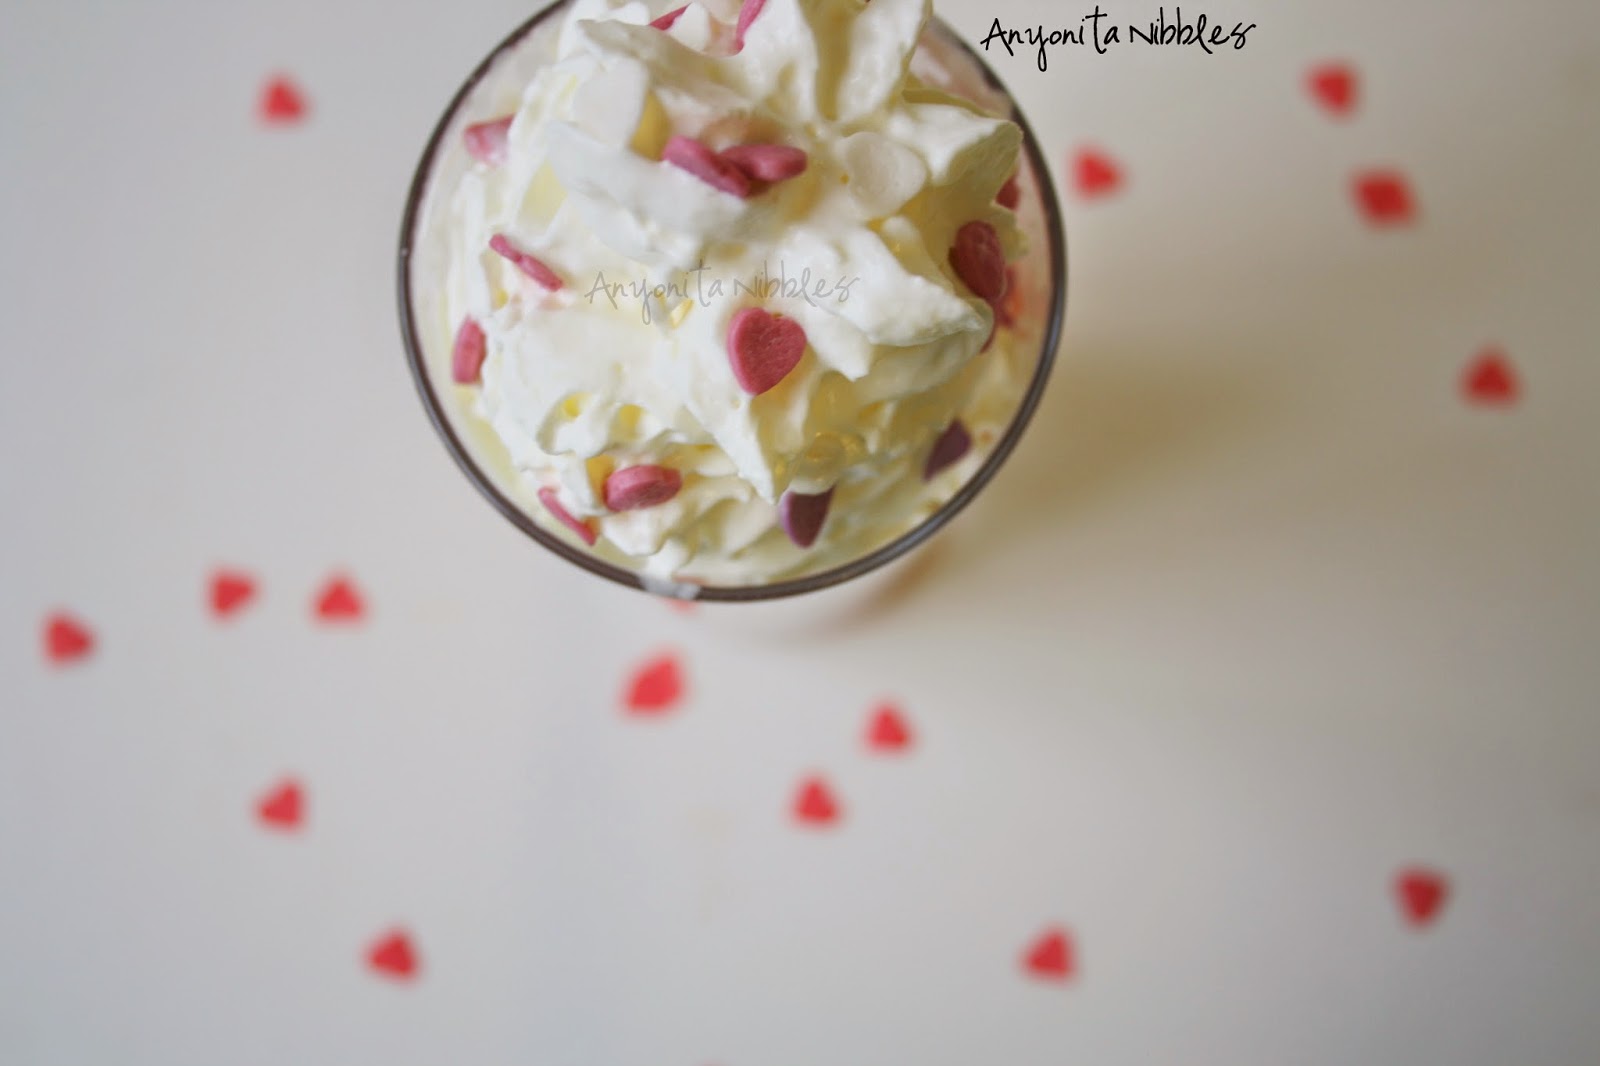 100 calorie banana shake with red velvet from Anyonita Nibbles